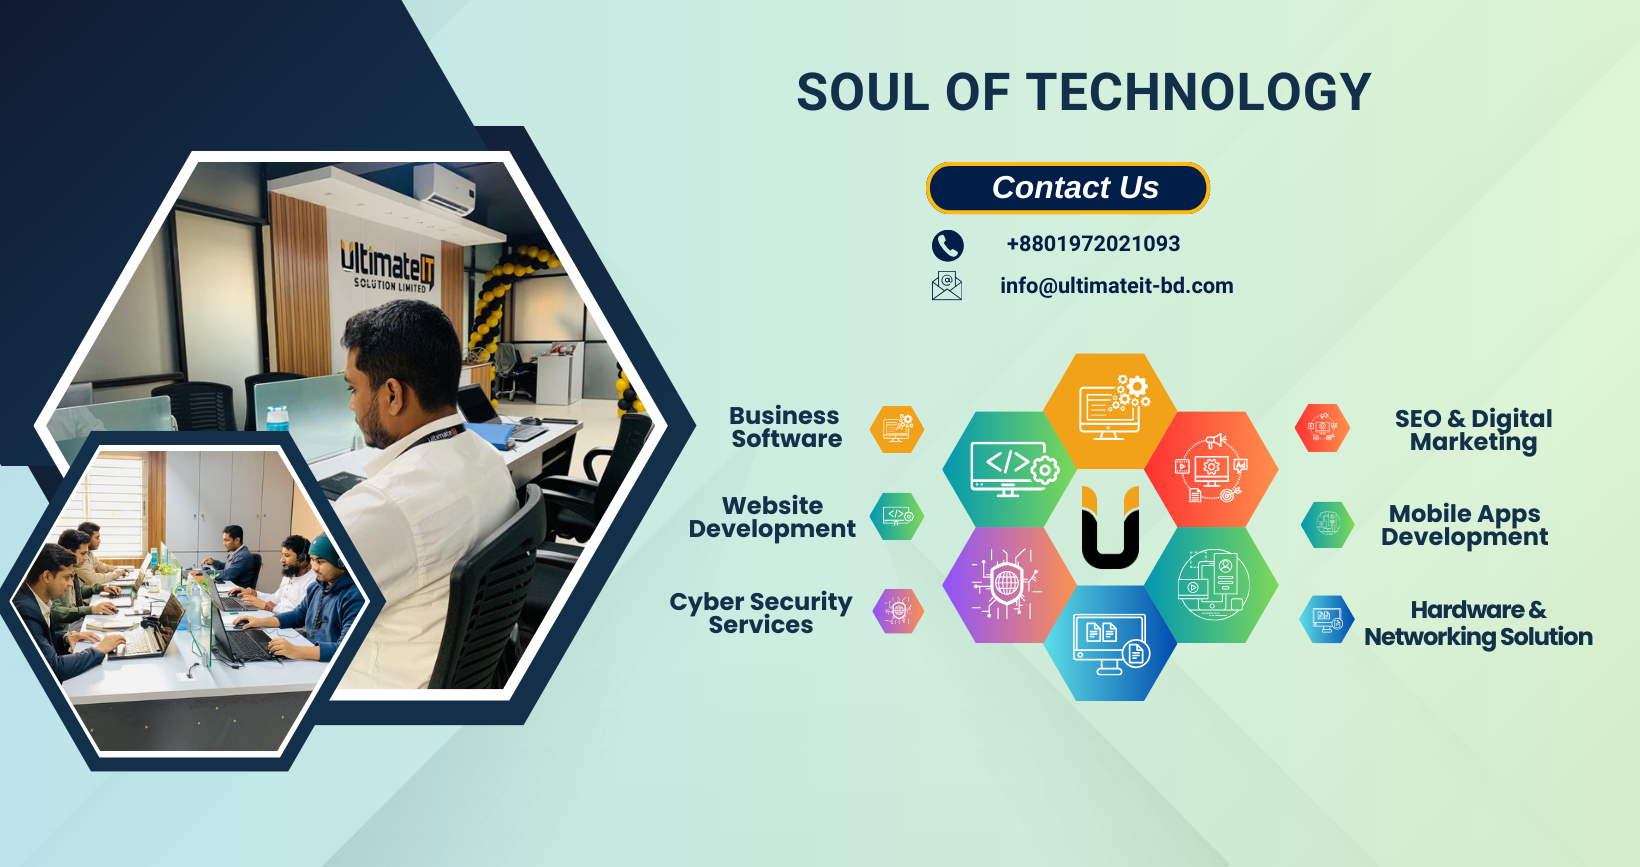 Services of Ultimate IT Solution